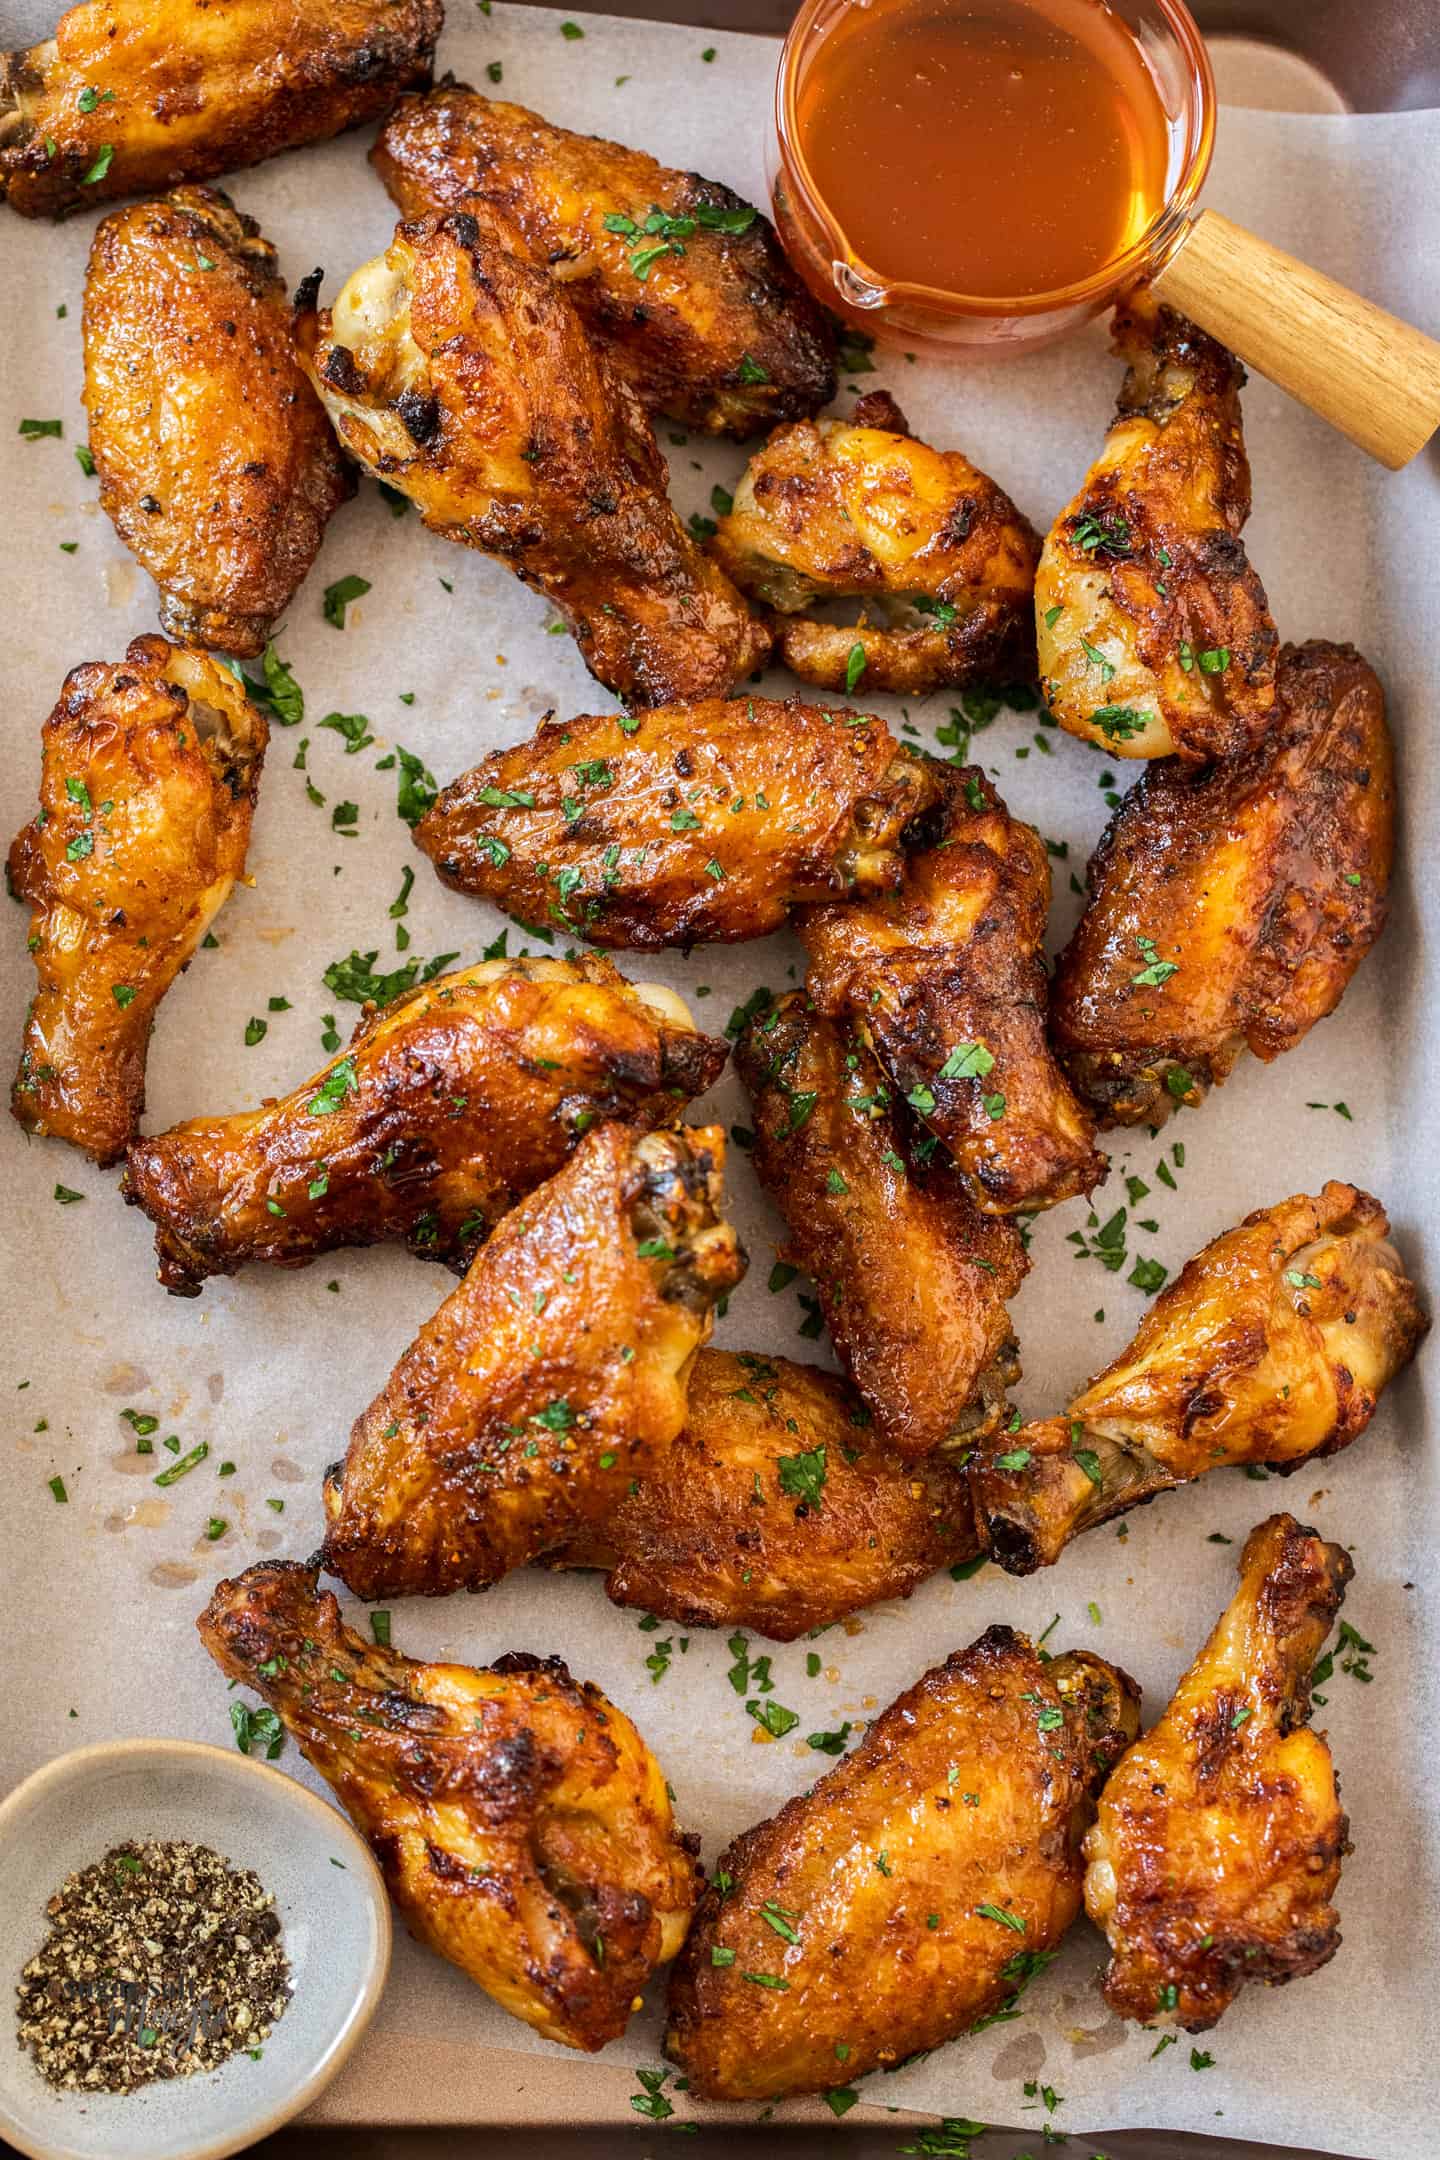 Golden baked chicken wings on a baking tray with a pot of honey.